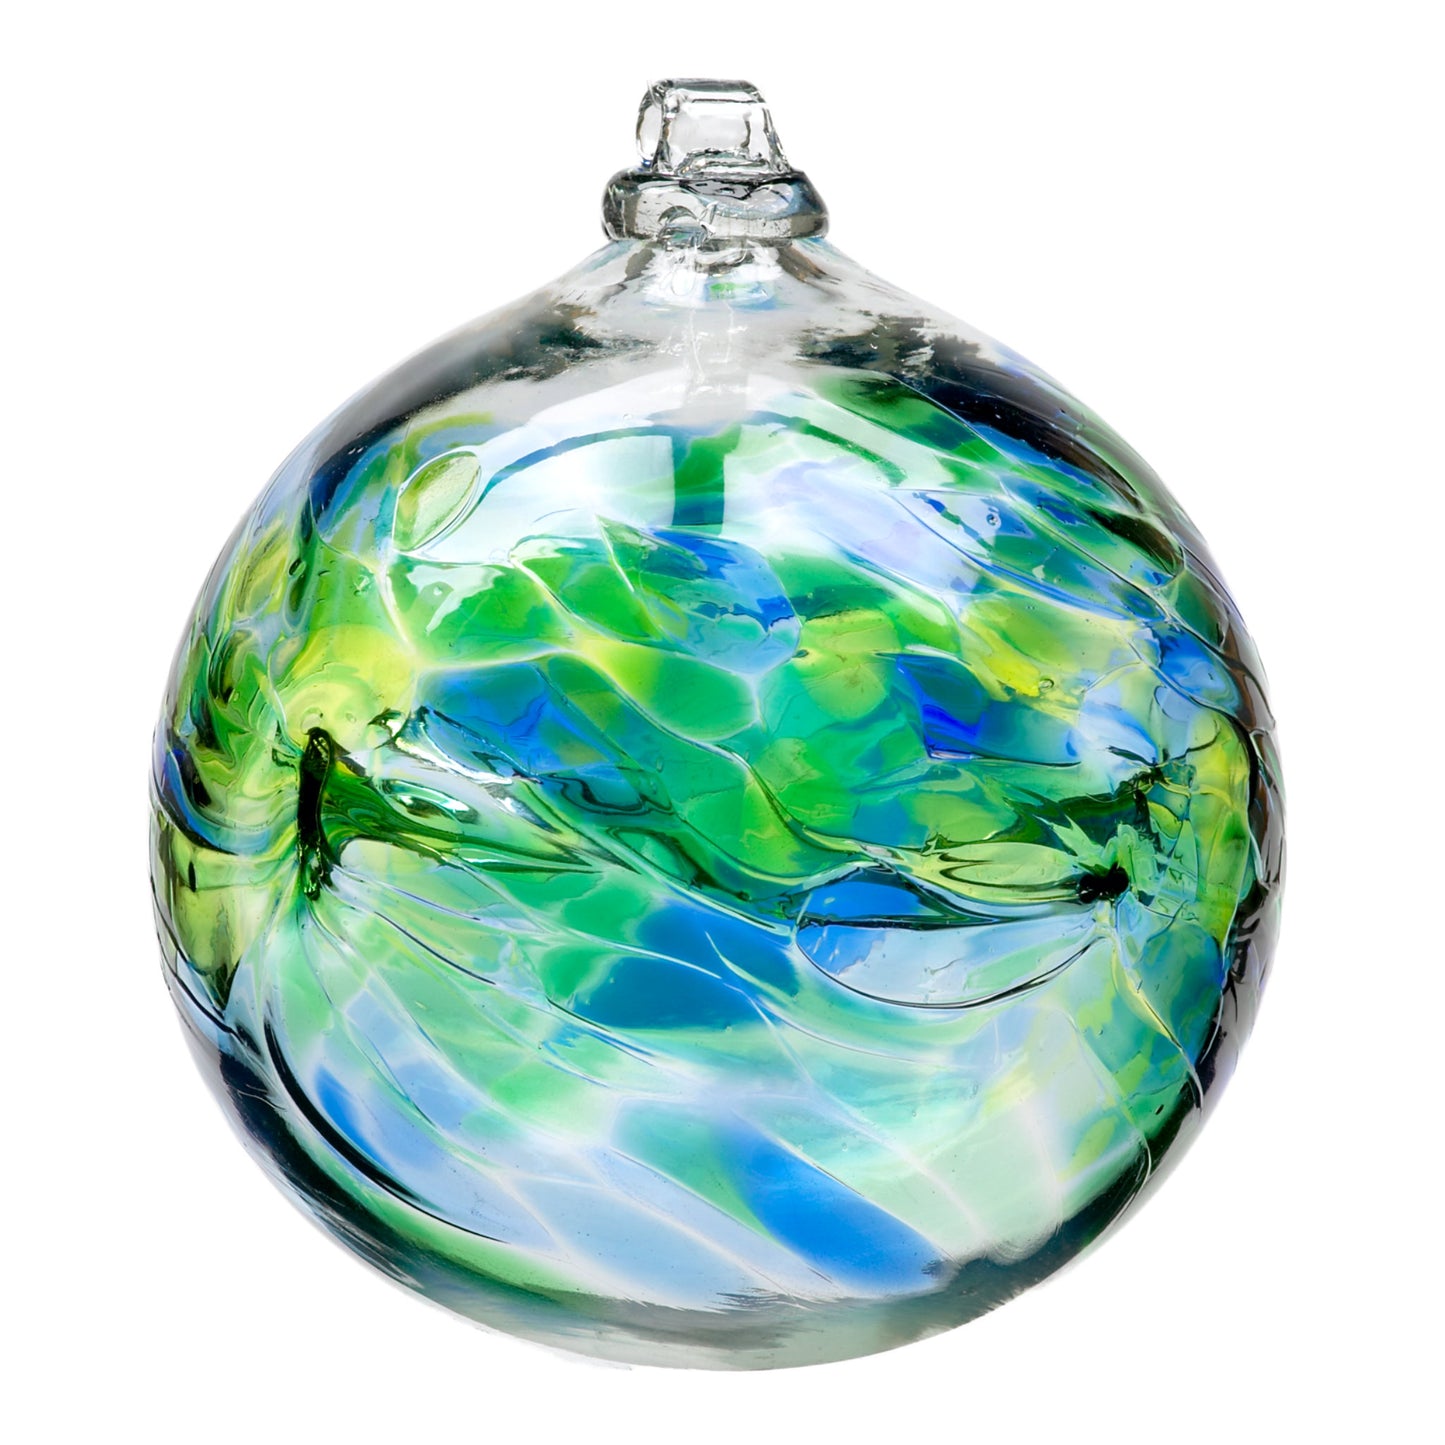 August Glass Orb - 6"